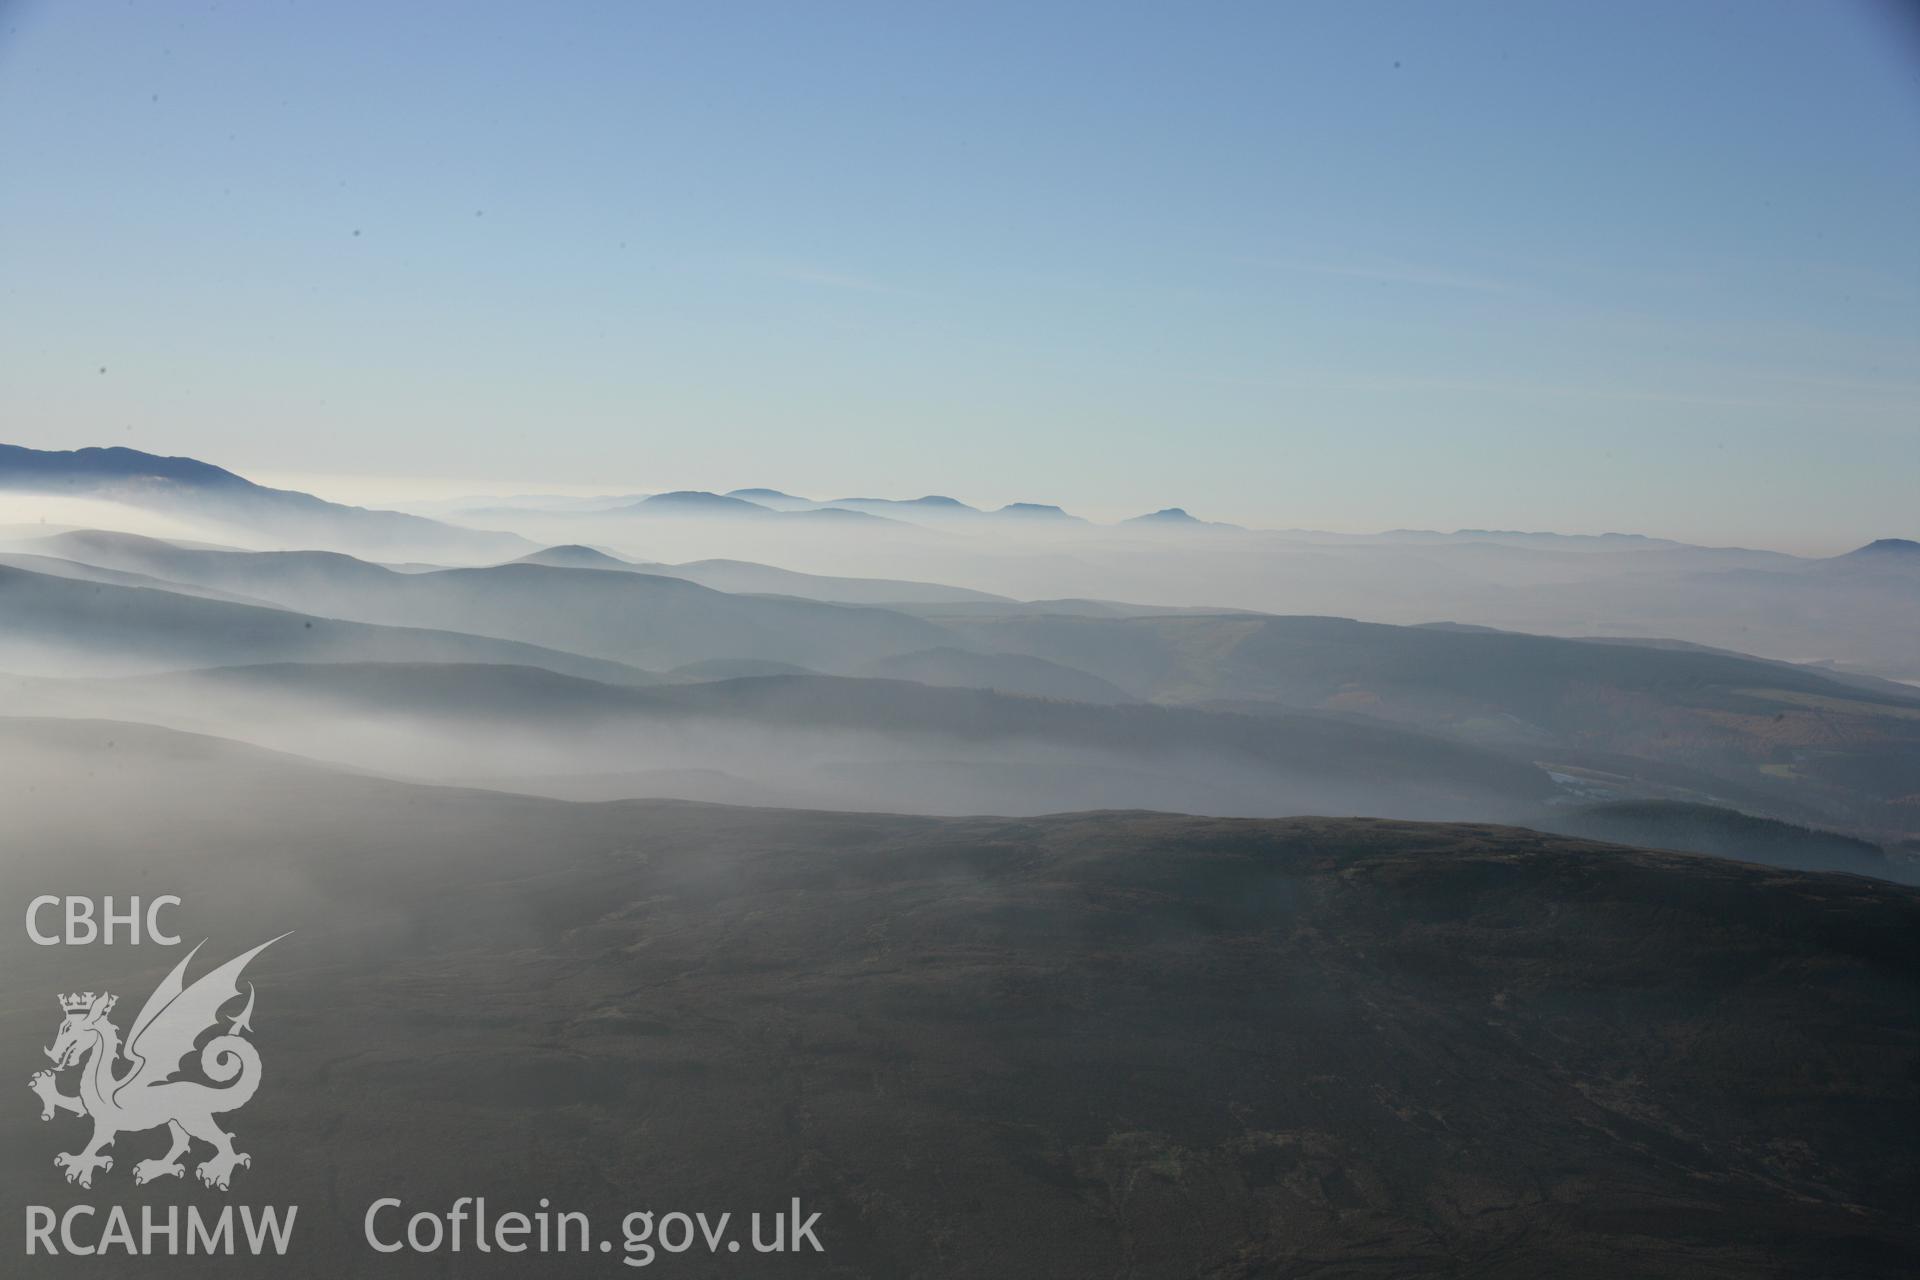 RCAHMW colour oblique aerial photograph of Foel Cwm Sian Llwyd to Penllyn Forest, in panoramic winter landscape view looking west, non-archaeological Taken on 21 November 2005 by Toby Driver